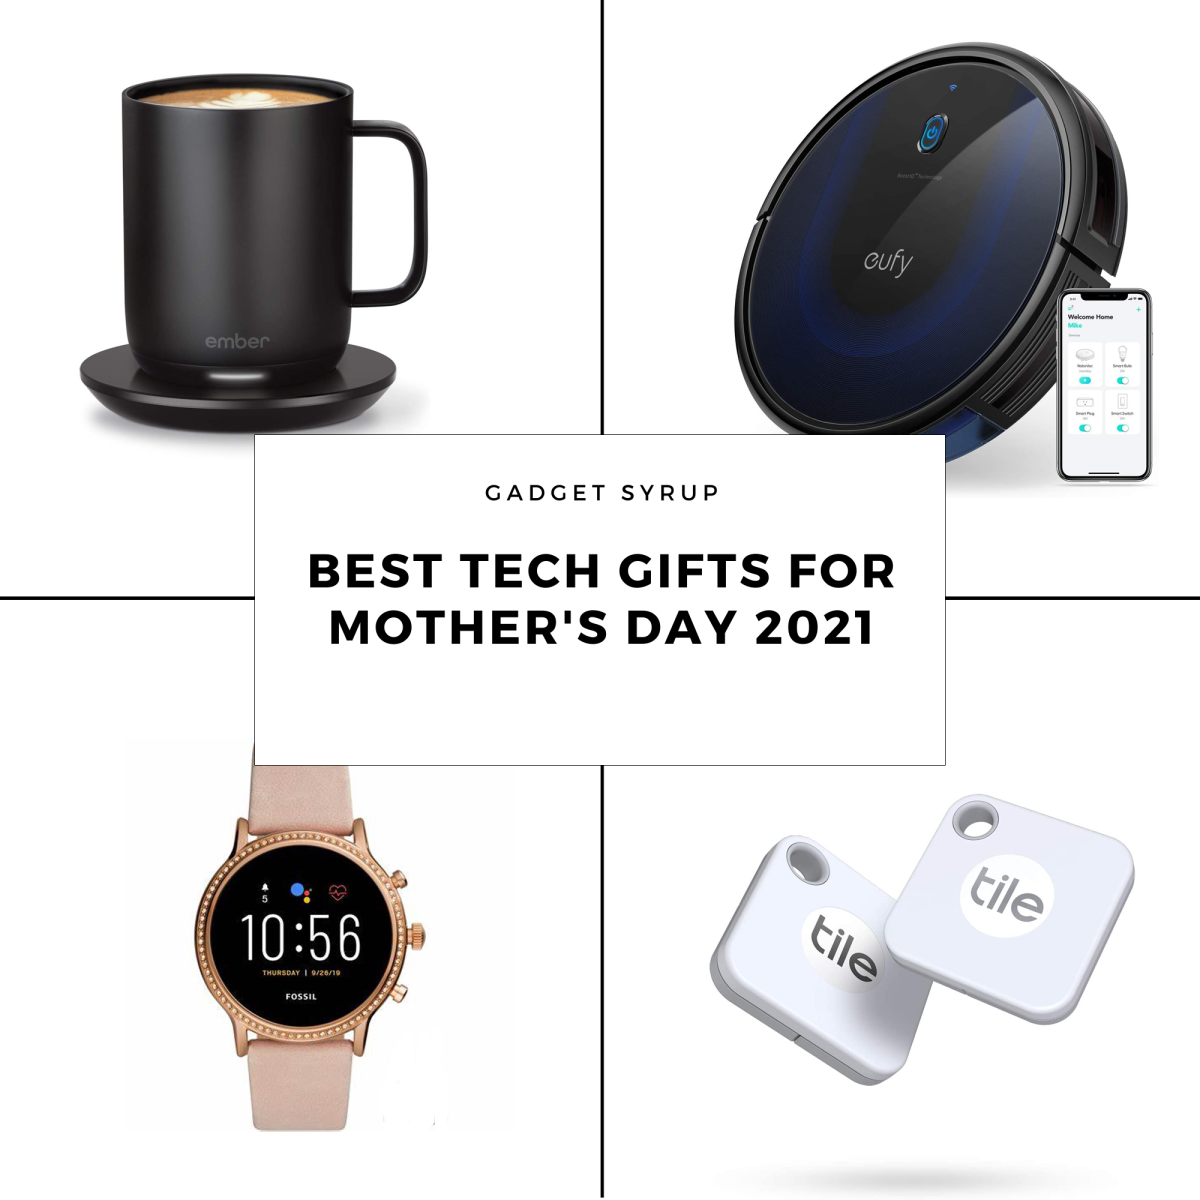 Best Tech Gifts For Mother’s Day 2021